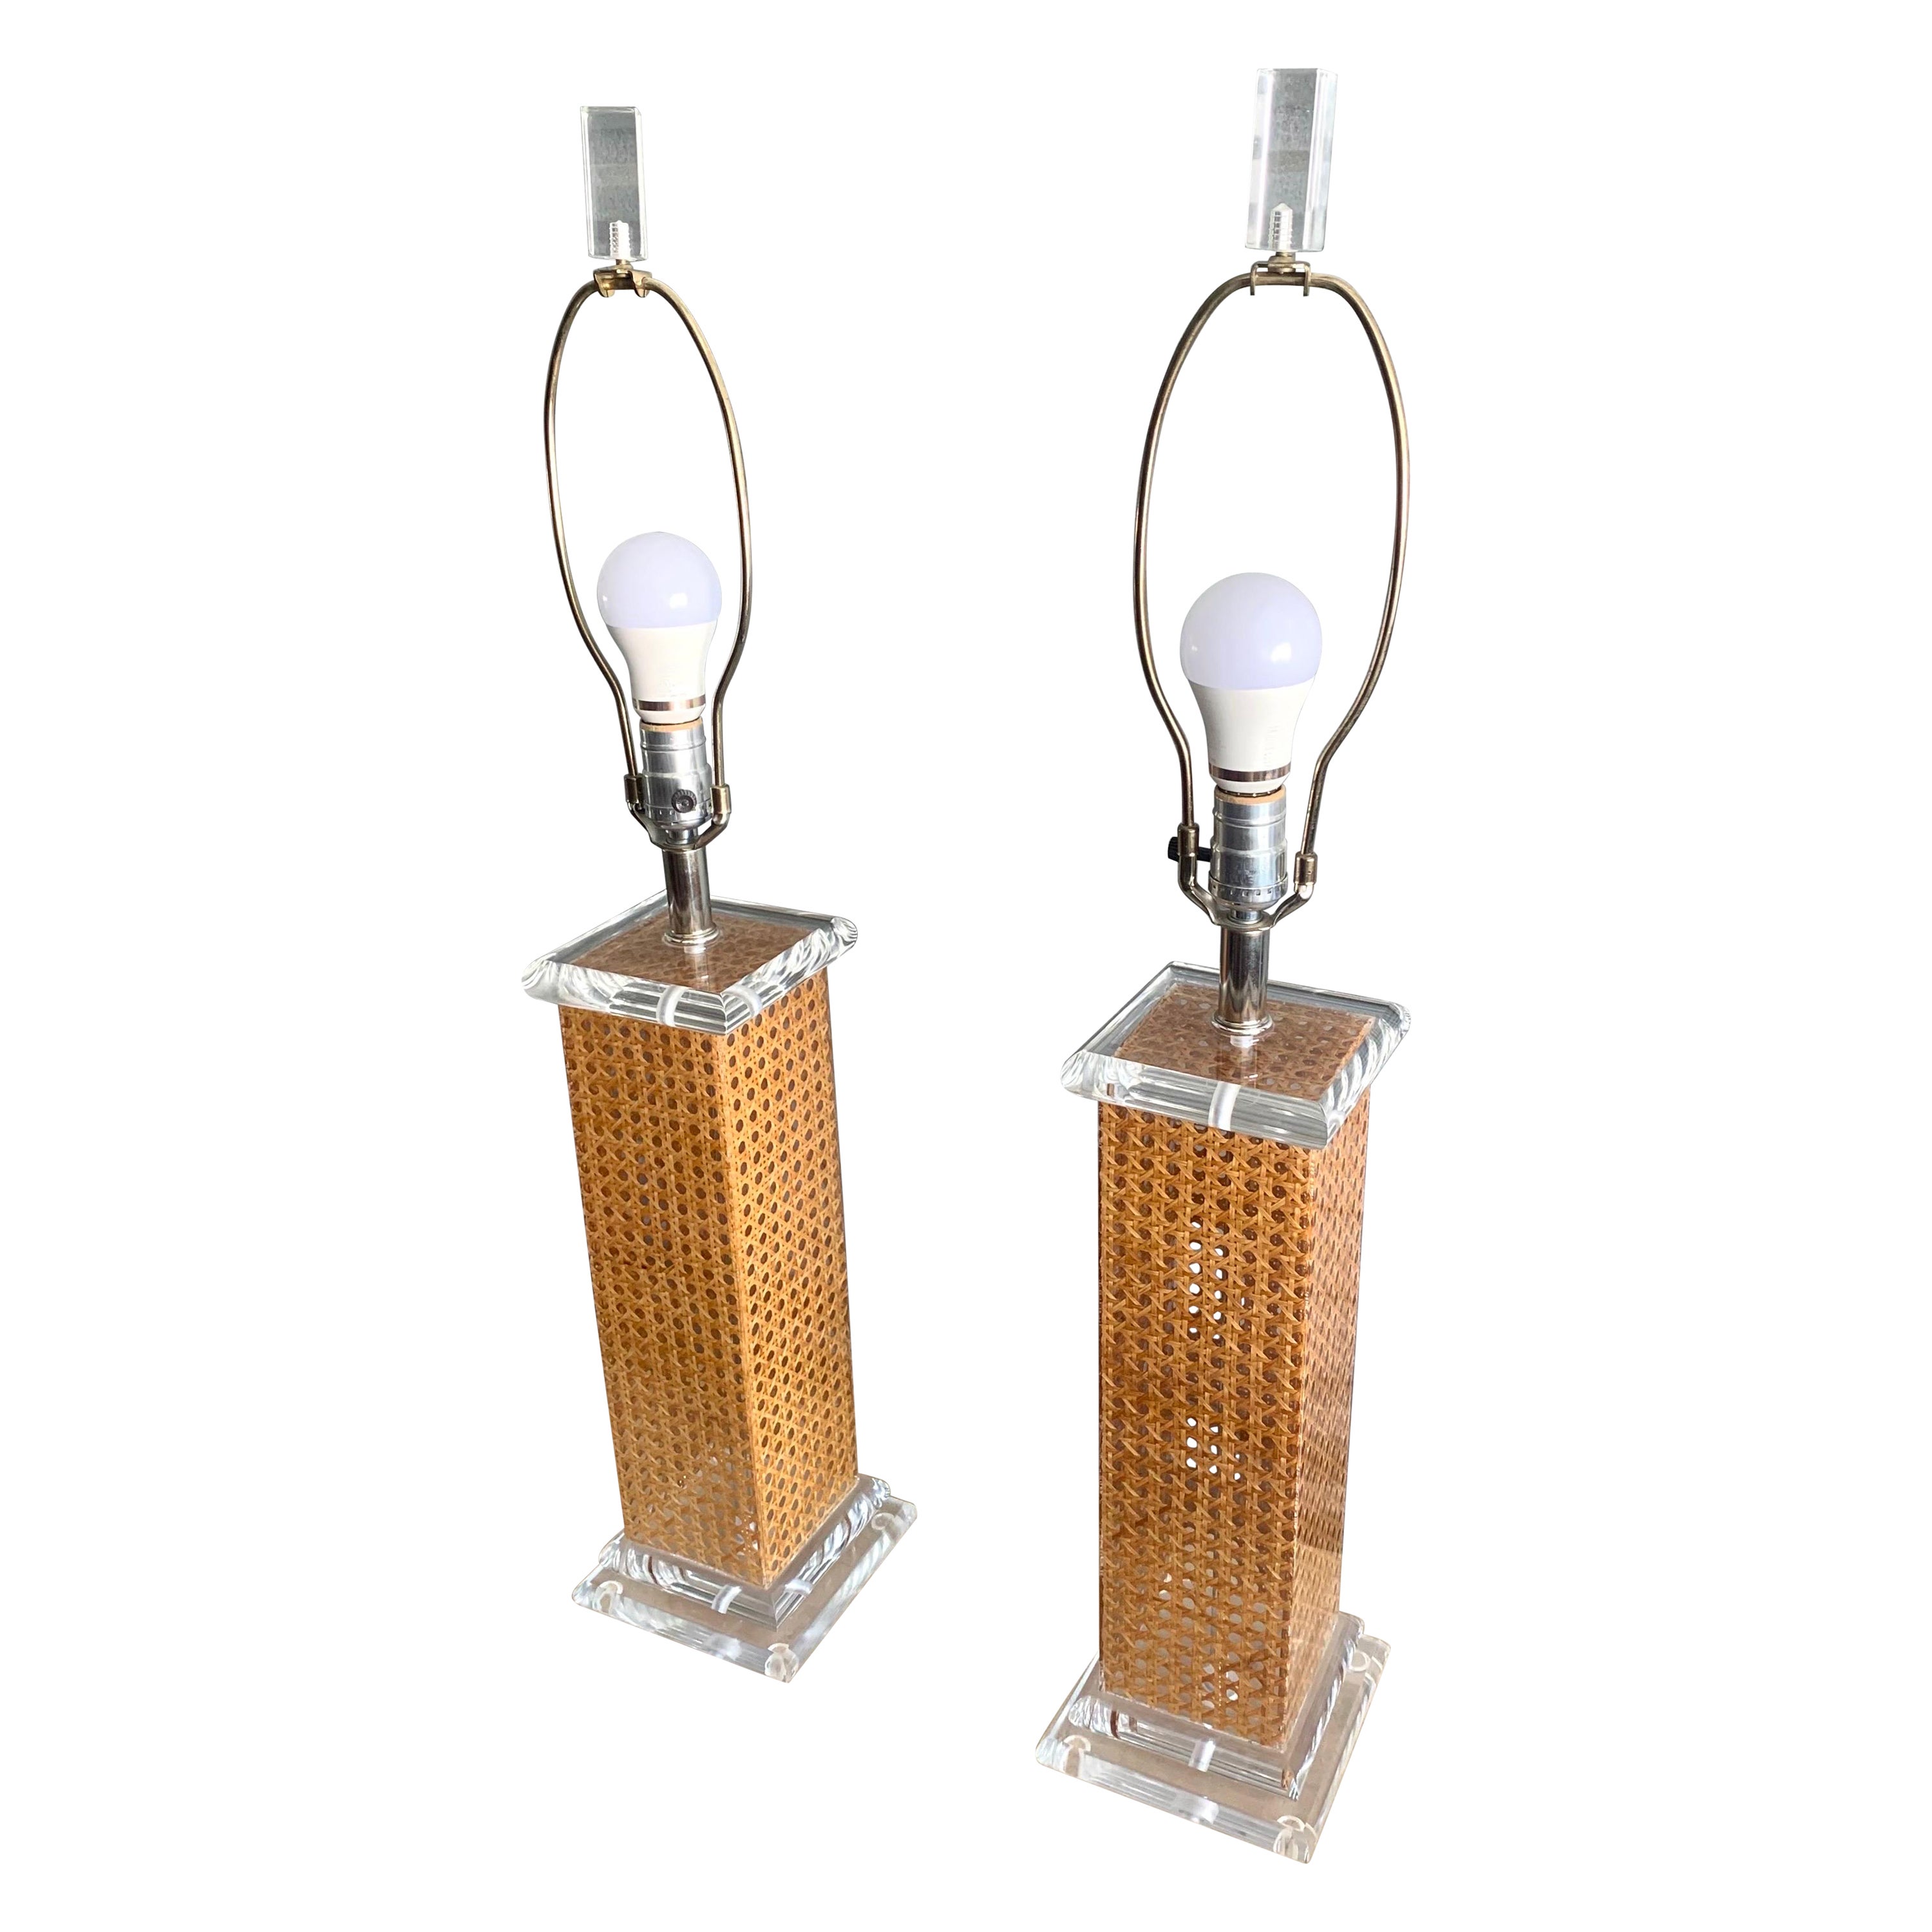 Hollywood Regency Lucite and Cane Table Lamps, Circa 1970s For Sale